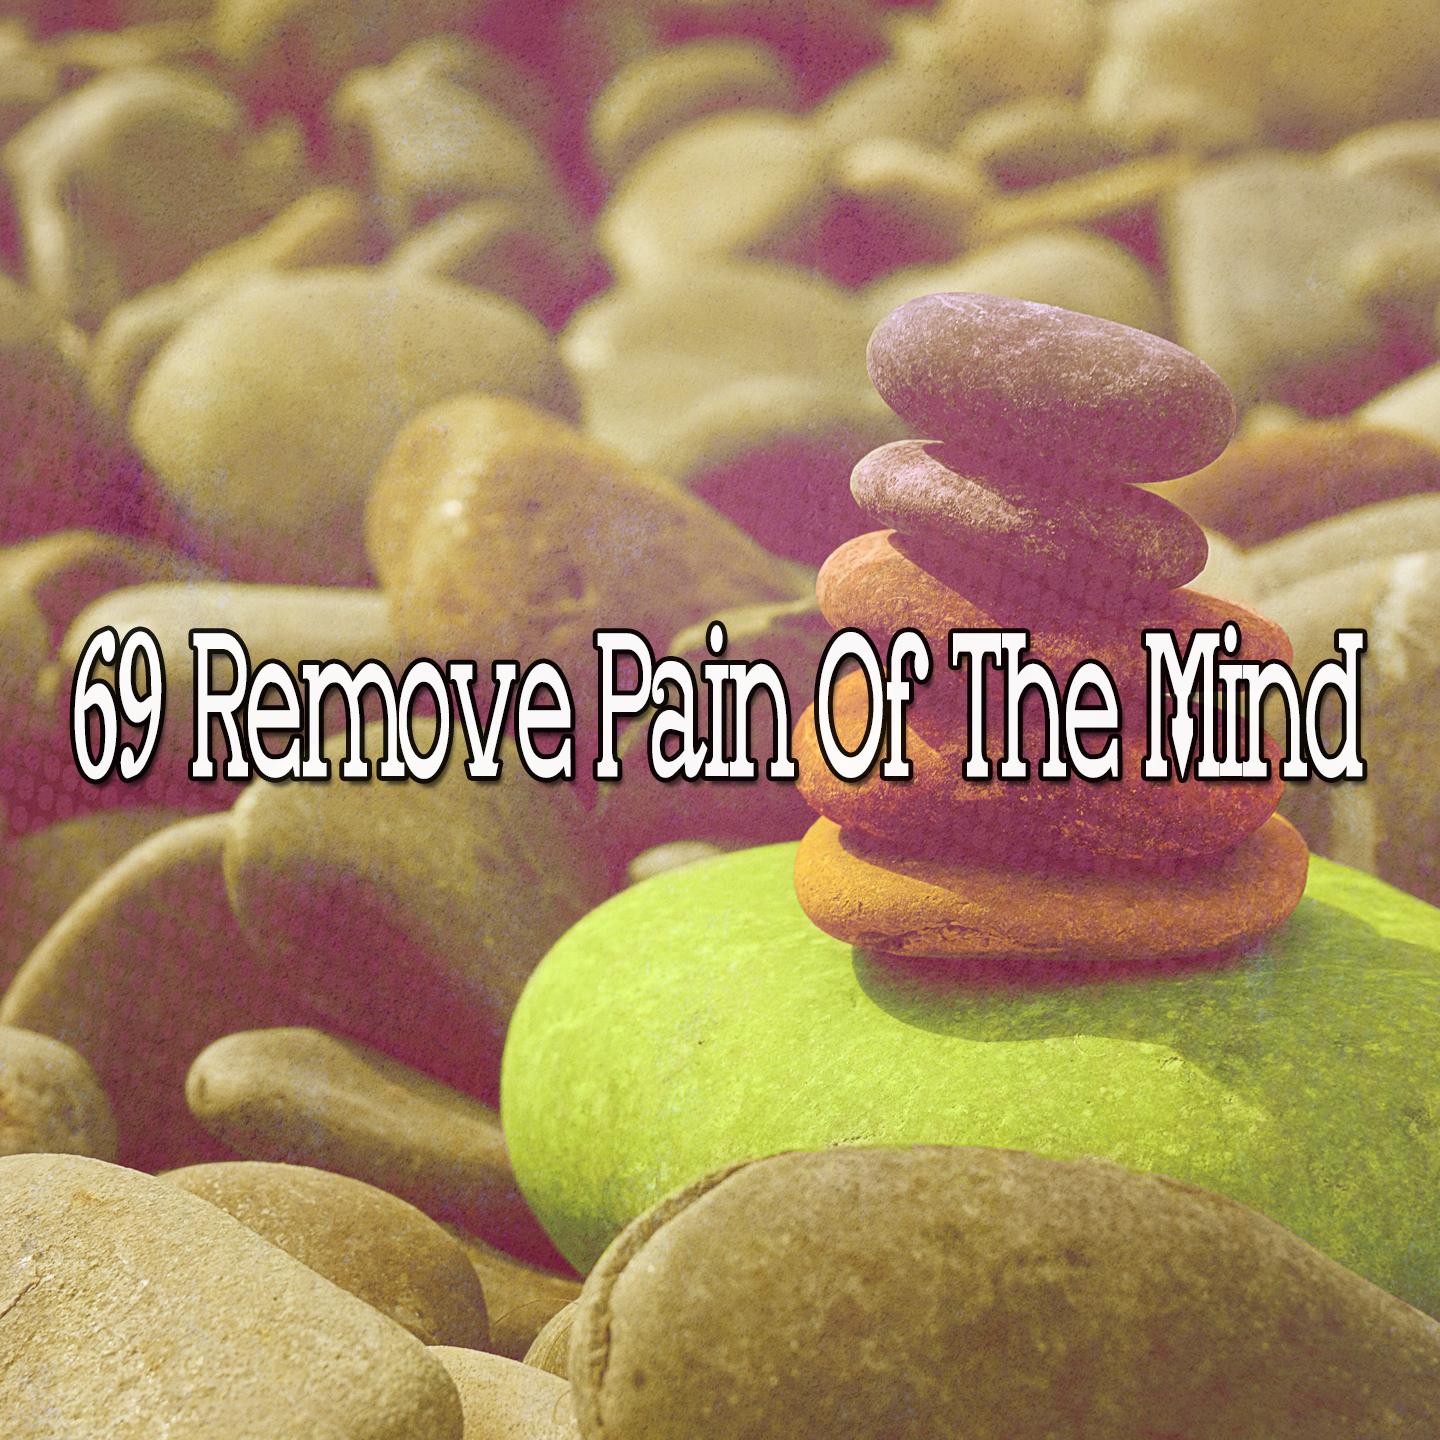 69 Remove Pain of the Mind